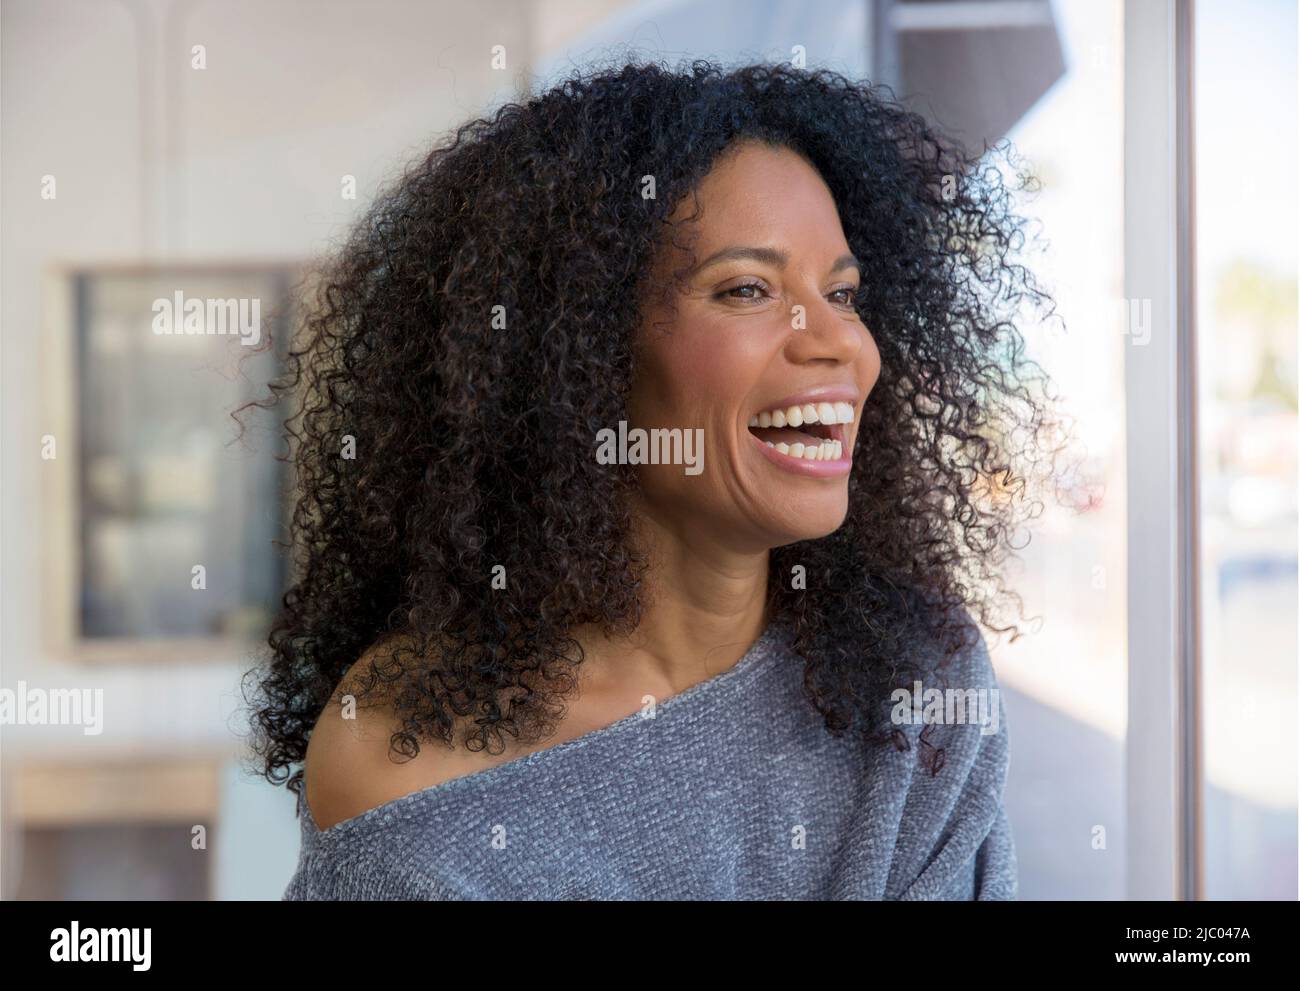 Mixed race, middle-aged woman laughing and looking out the window. Stock Photo